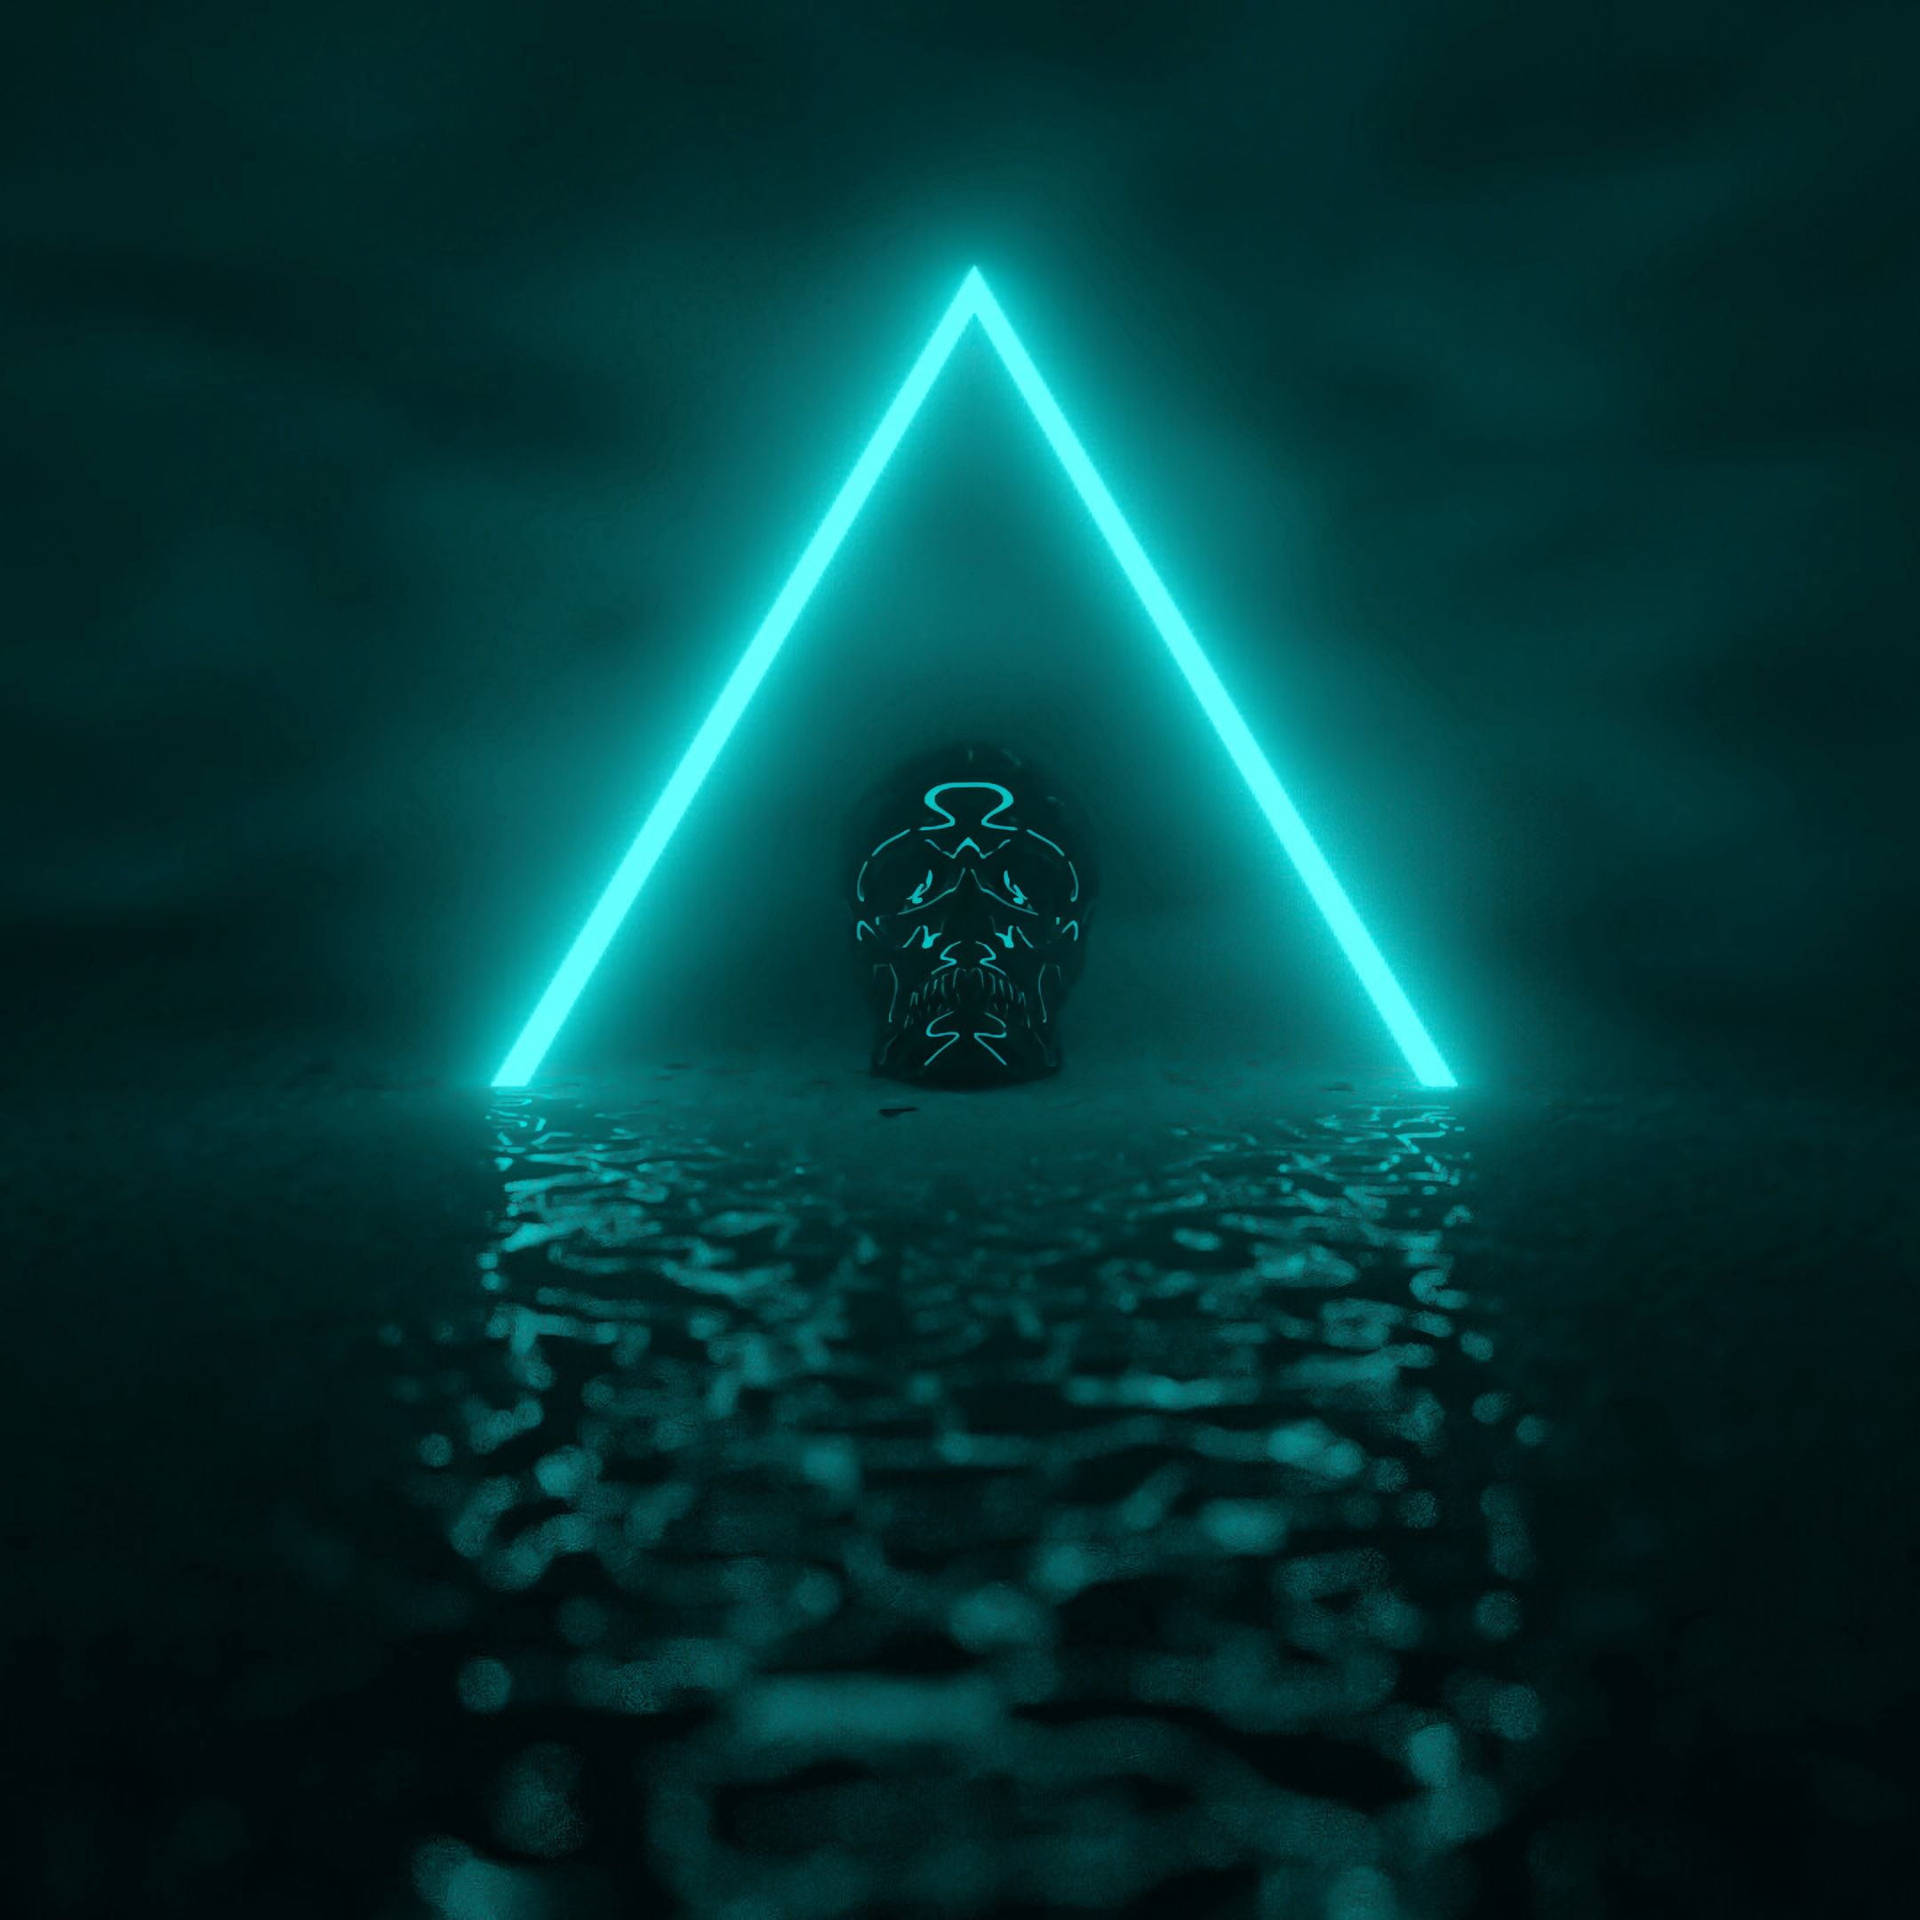 Dark Neon Teal Triangle With Skull Wallpaper